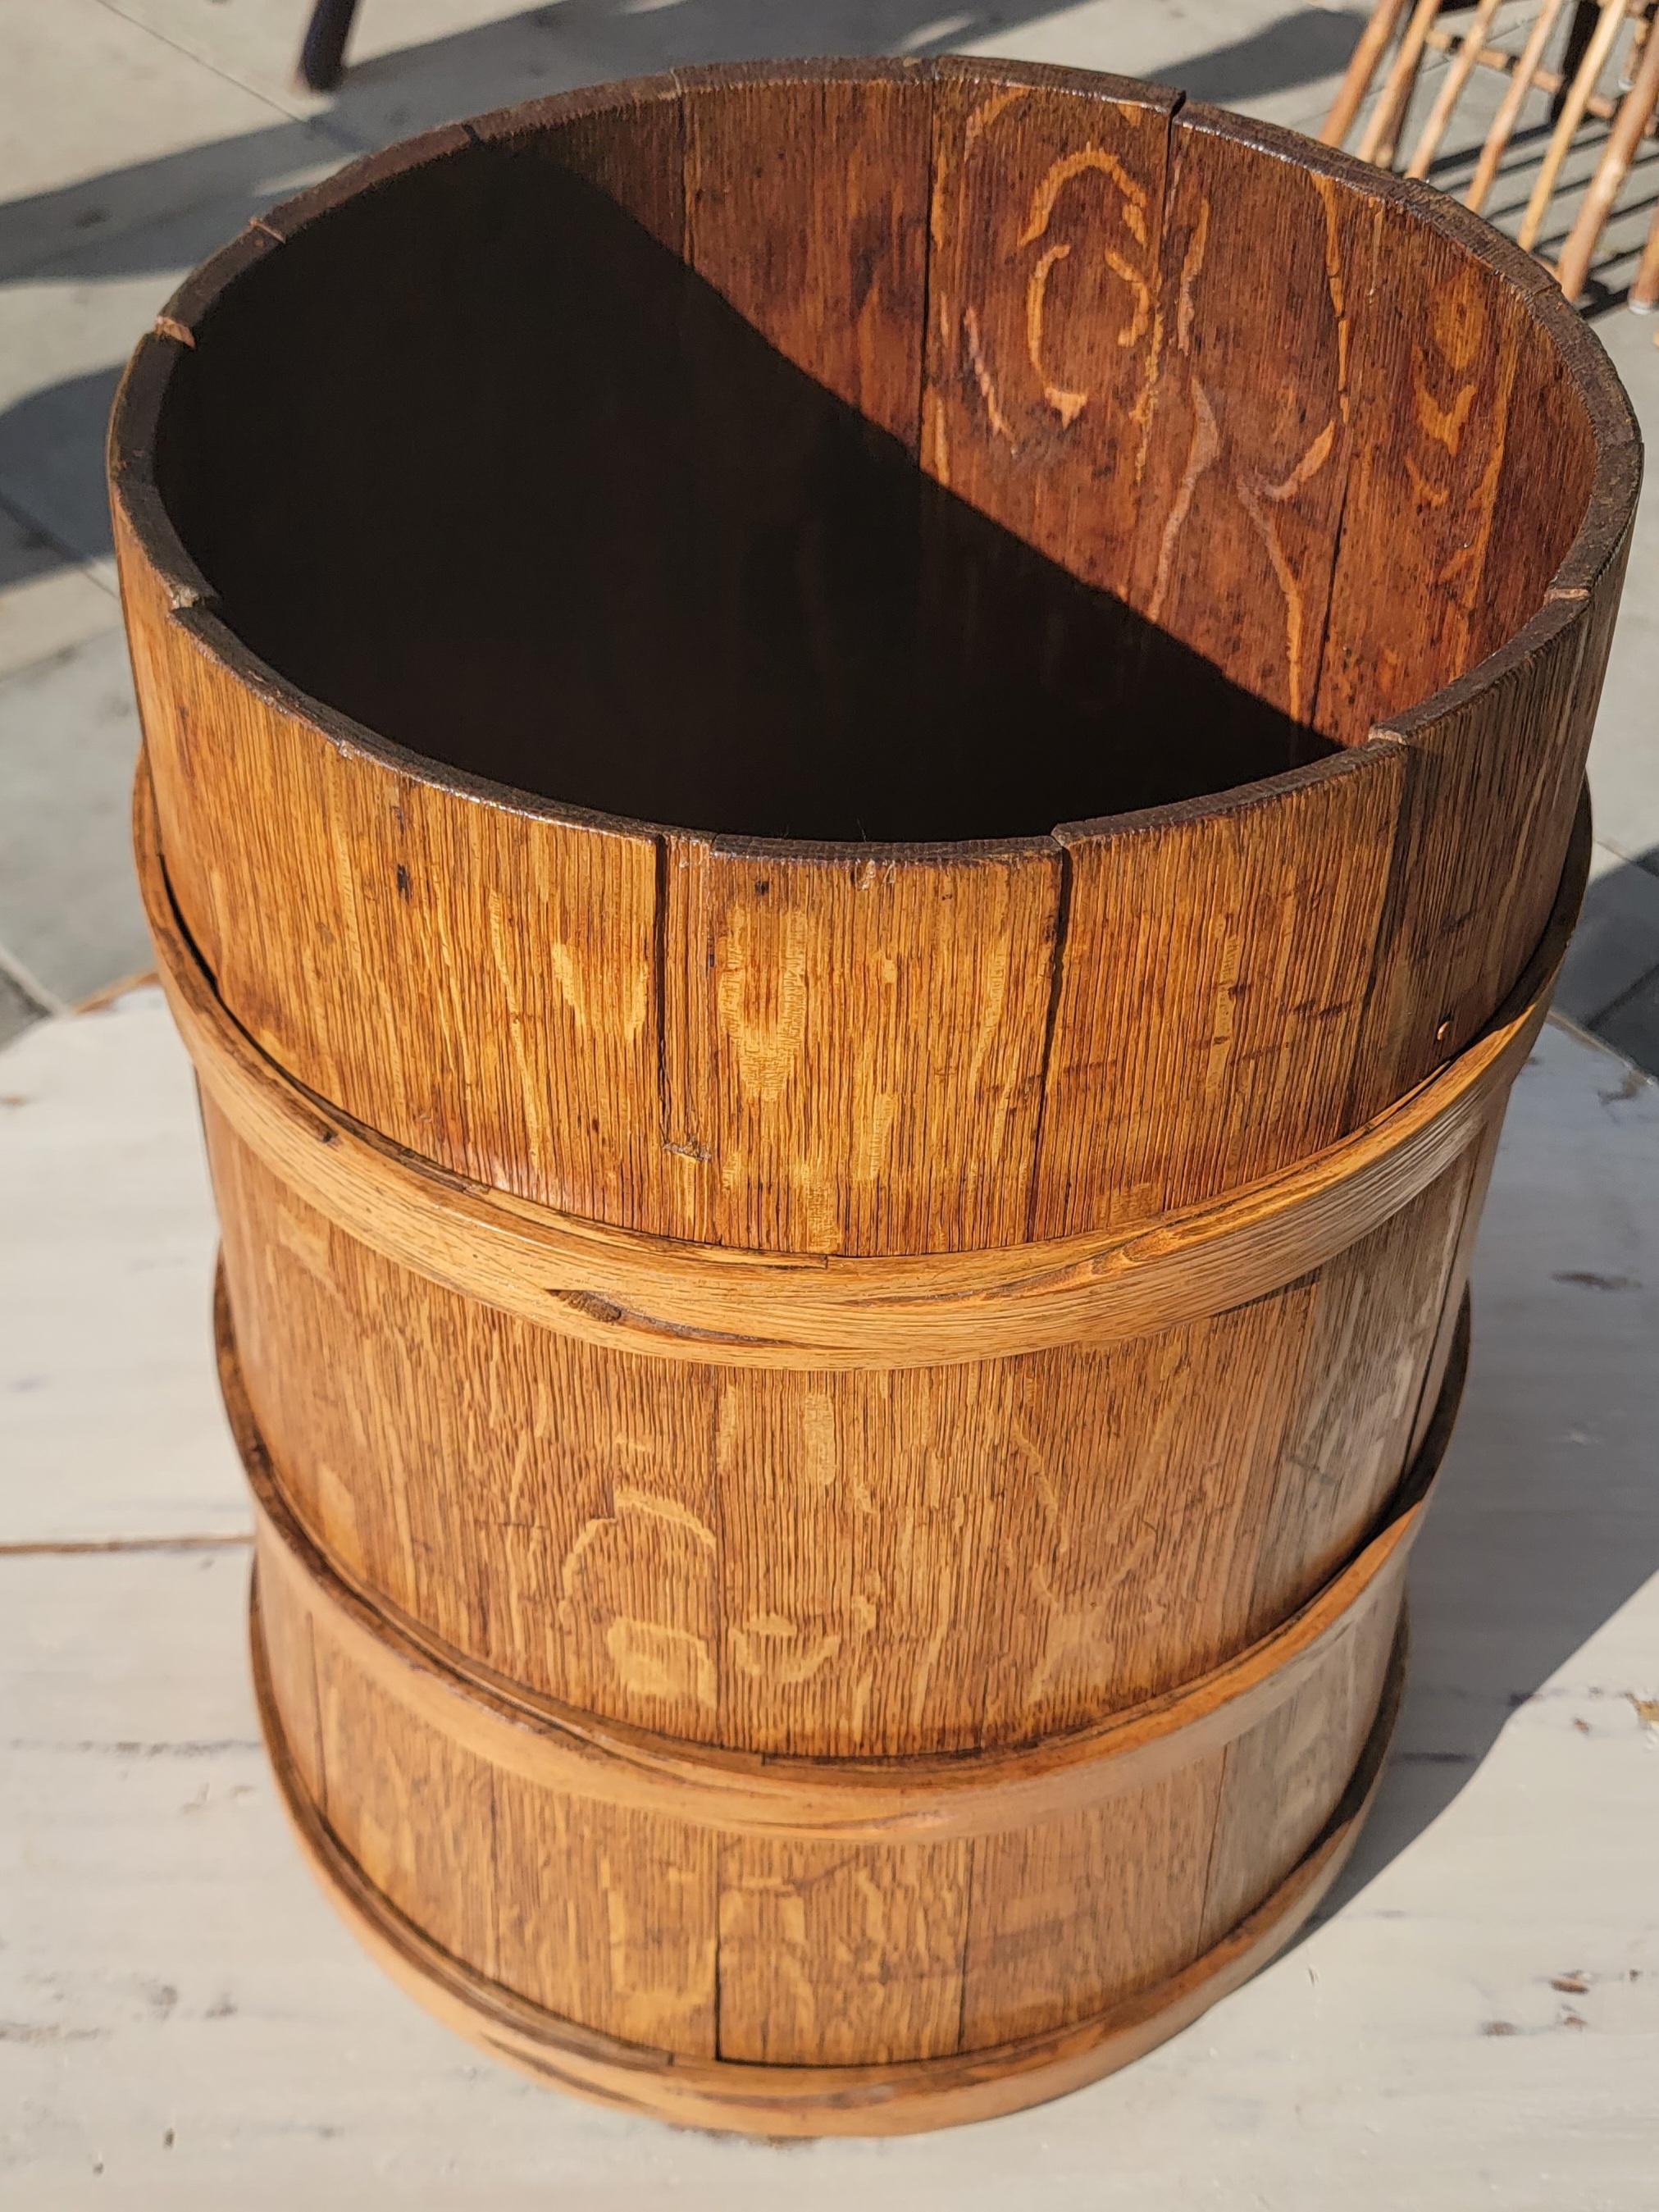 19th C Piggin or measure bucket. The bucket has tight wood banding and is in great condition. Wear due to age. It would be great as an umbrella stand.